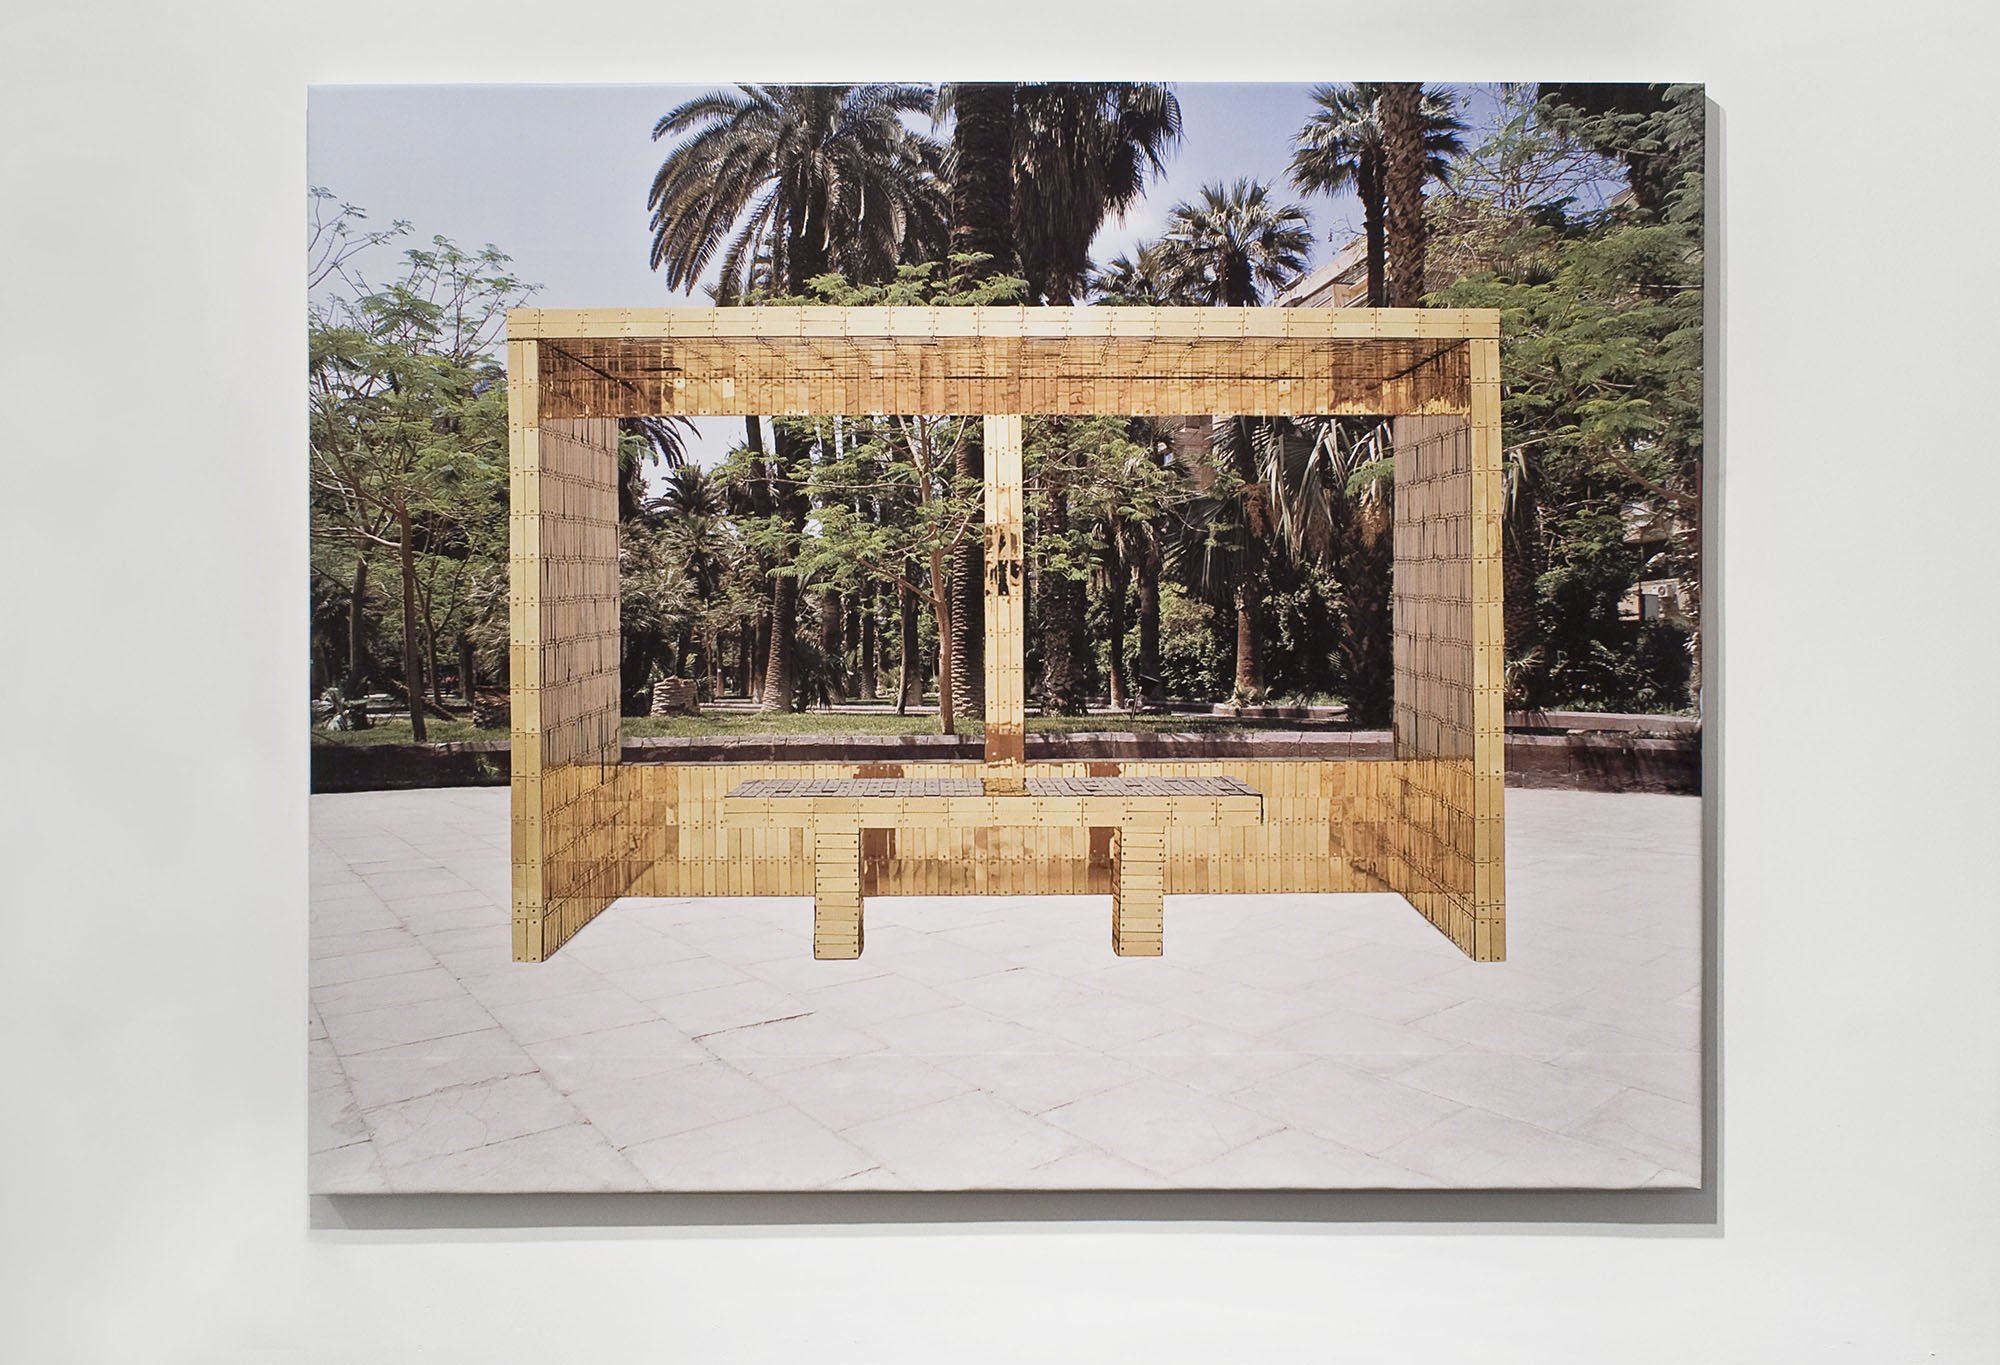 Iman Issa, Bus Station (Meeting Point Series), vinyl print, 200 x 160 cm, 2004. Installation view, All That Shines Ain’t No Gold, Rodeo, Istanbul, 2012